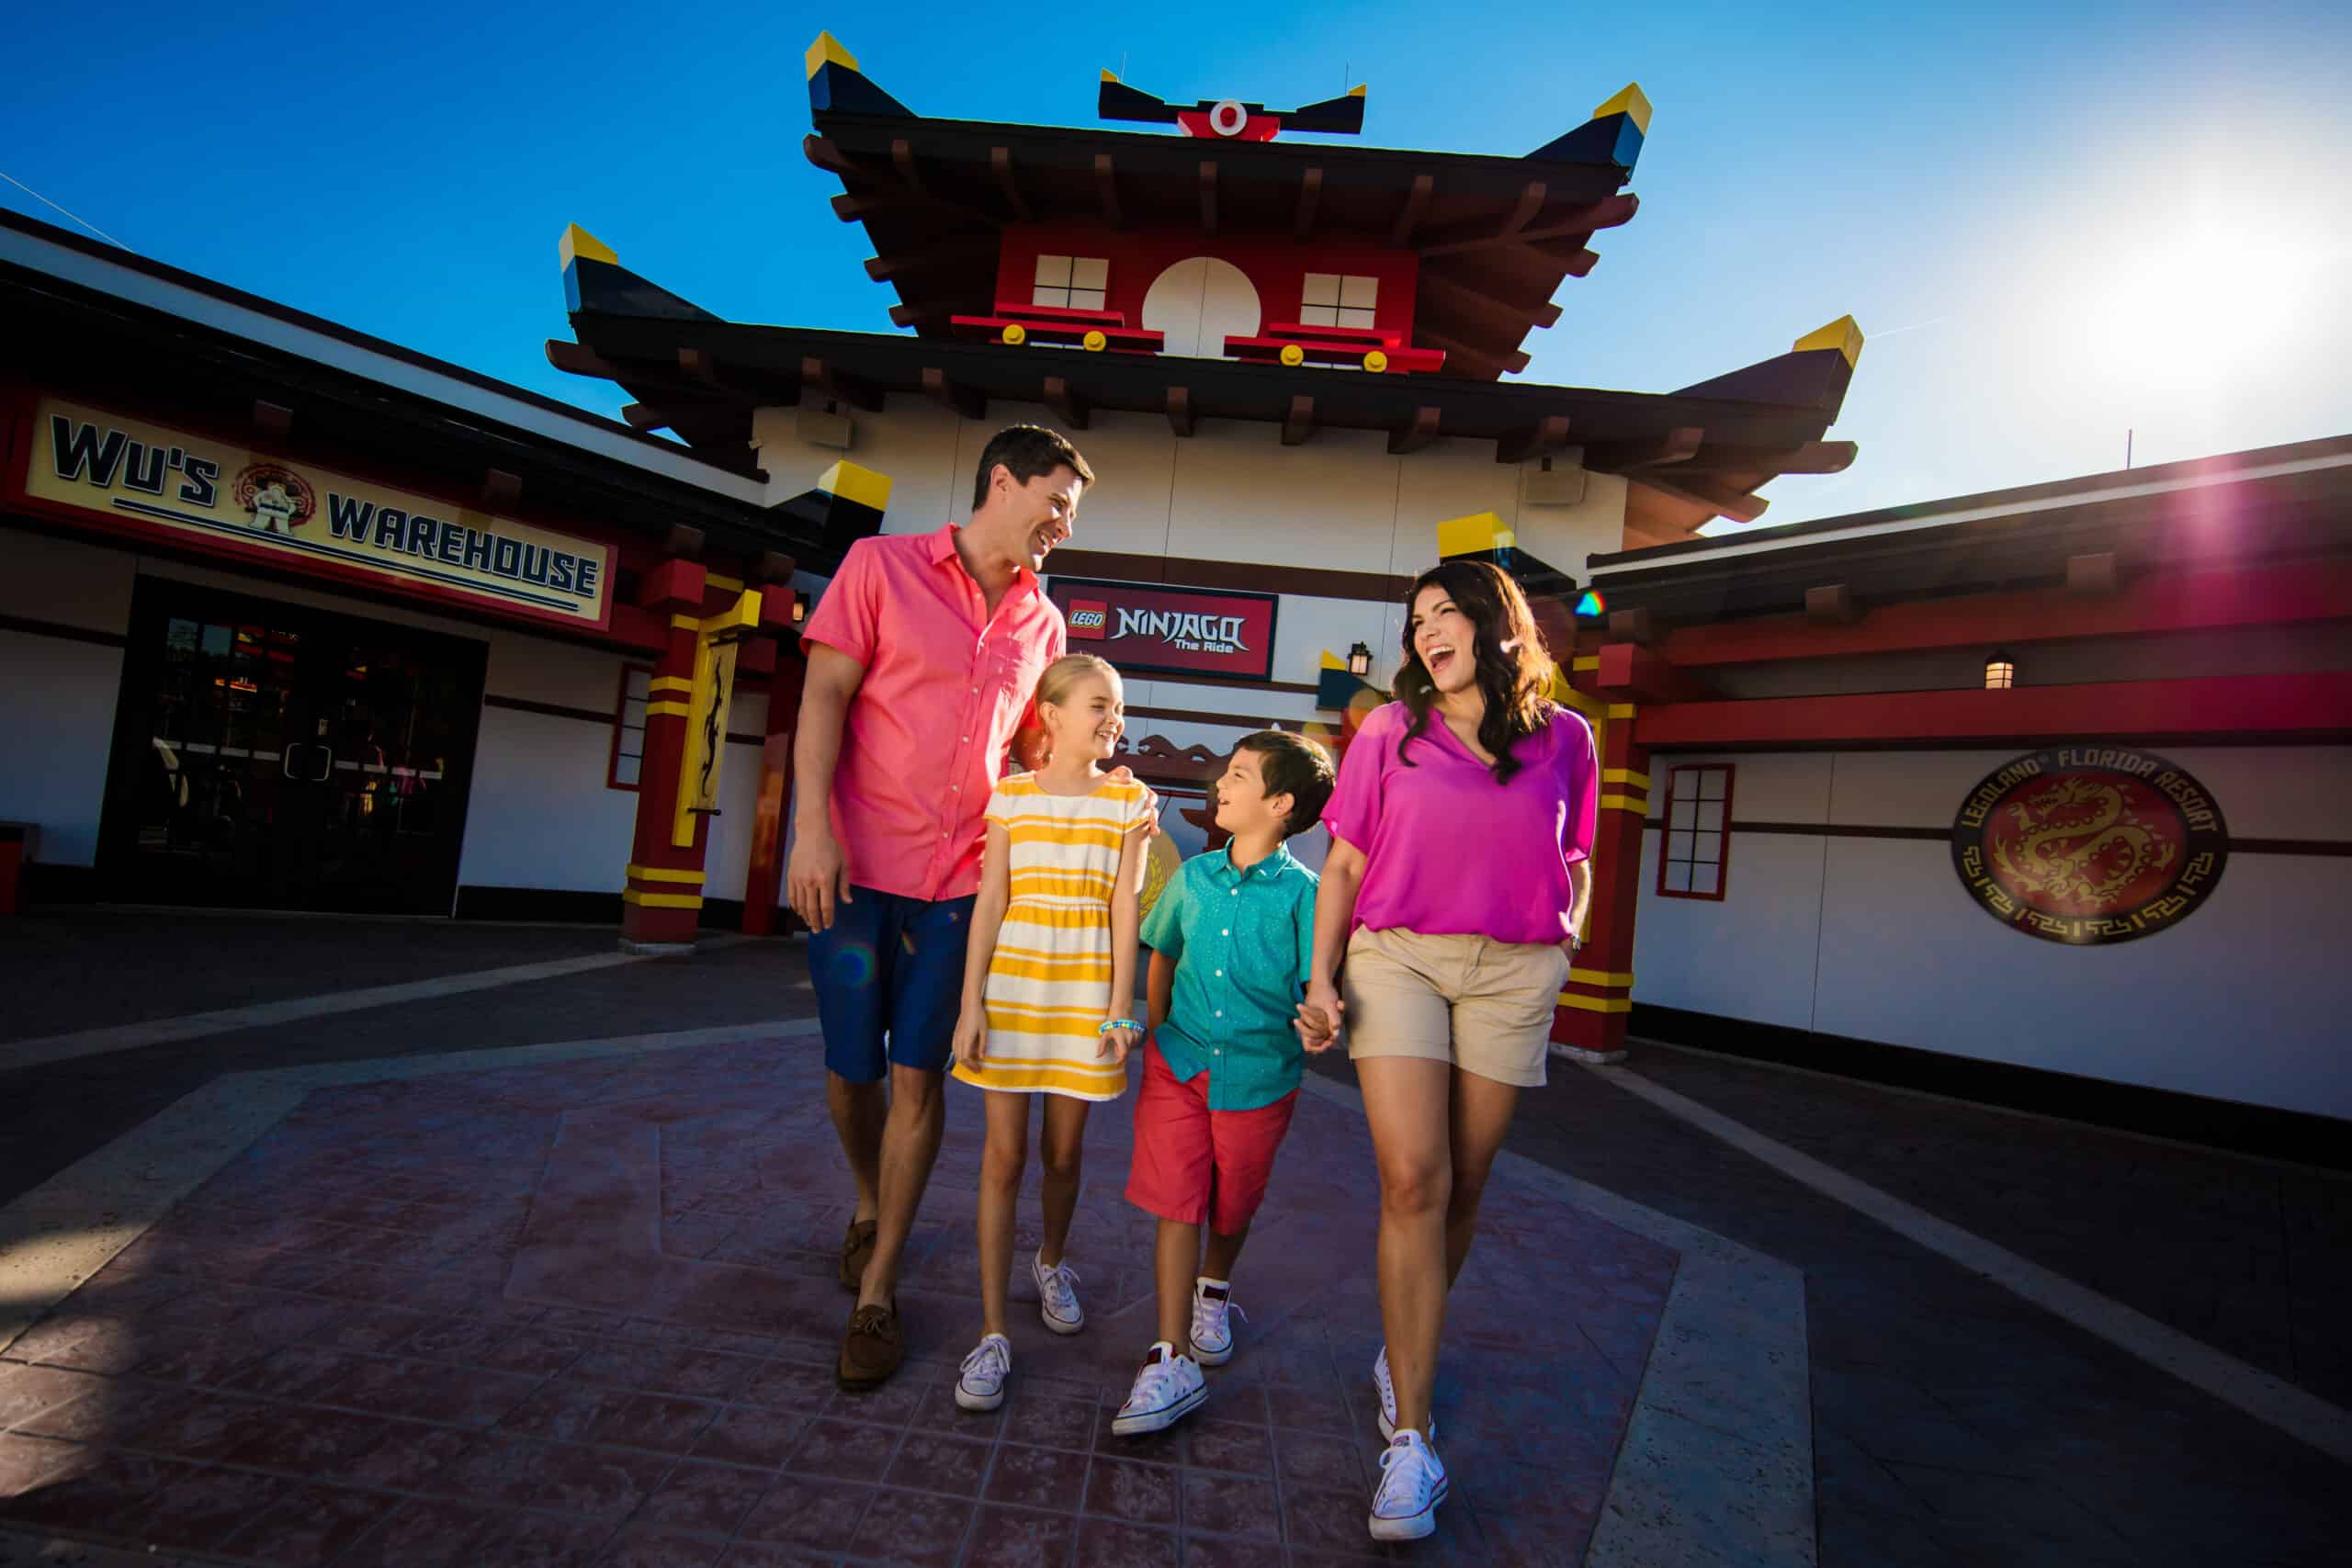 <p>While Legoland Florida is 45 minutes from the Disney parks, many feel it hits all the high notes and is worth the additional driving time.</p> <p>“Before our kids were teenagers, Legoland, hands down, was the first choice of which park to visit,” said Michelle of Love and Traveling. “And now we are taking our grandkids, who also enjoy Legoland best.”</p> <p>“Overall, Legoland Florida is a clear winner with younger children due to price, experience, and ease; Disney is just harder,” said Richard Campbell of 10Adventures.</p>